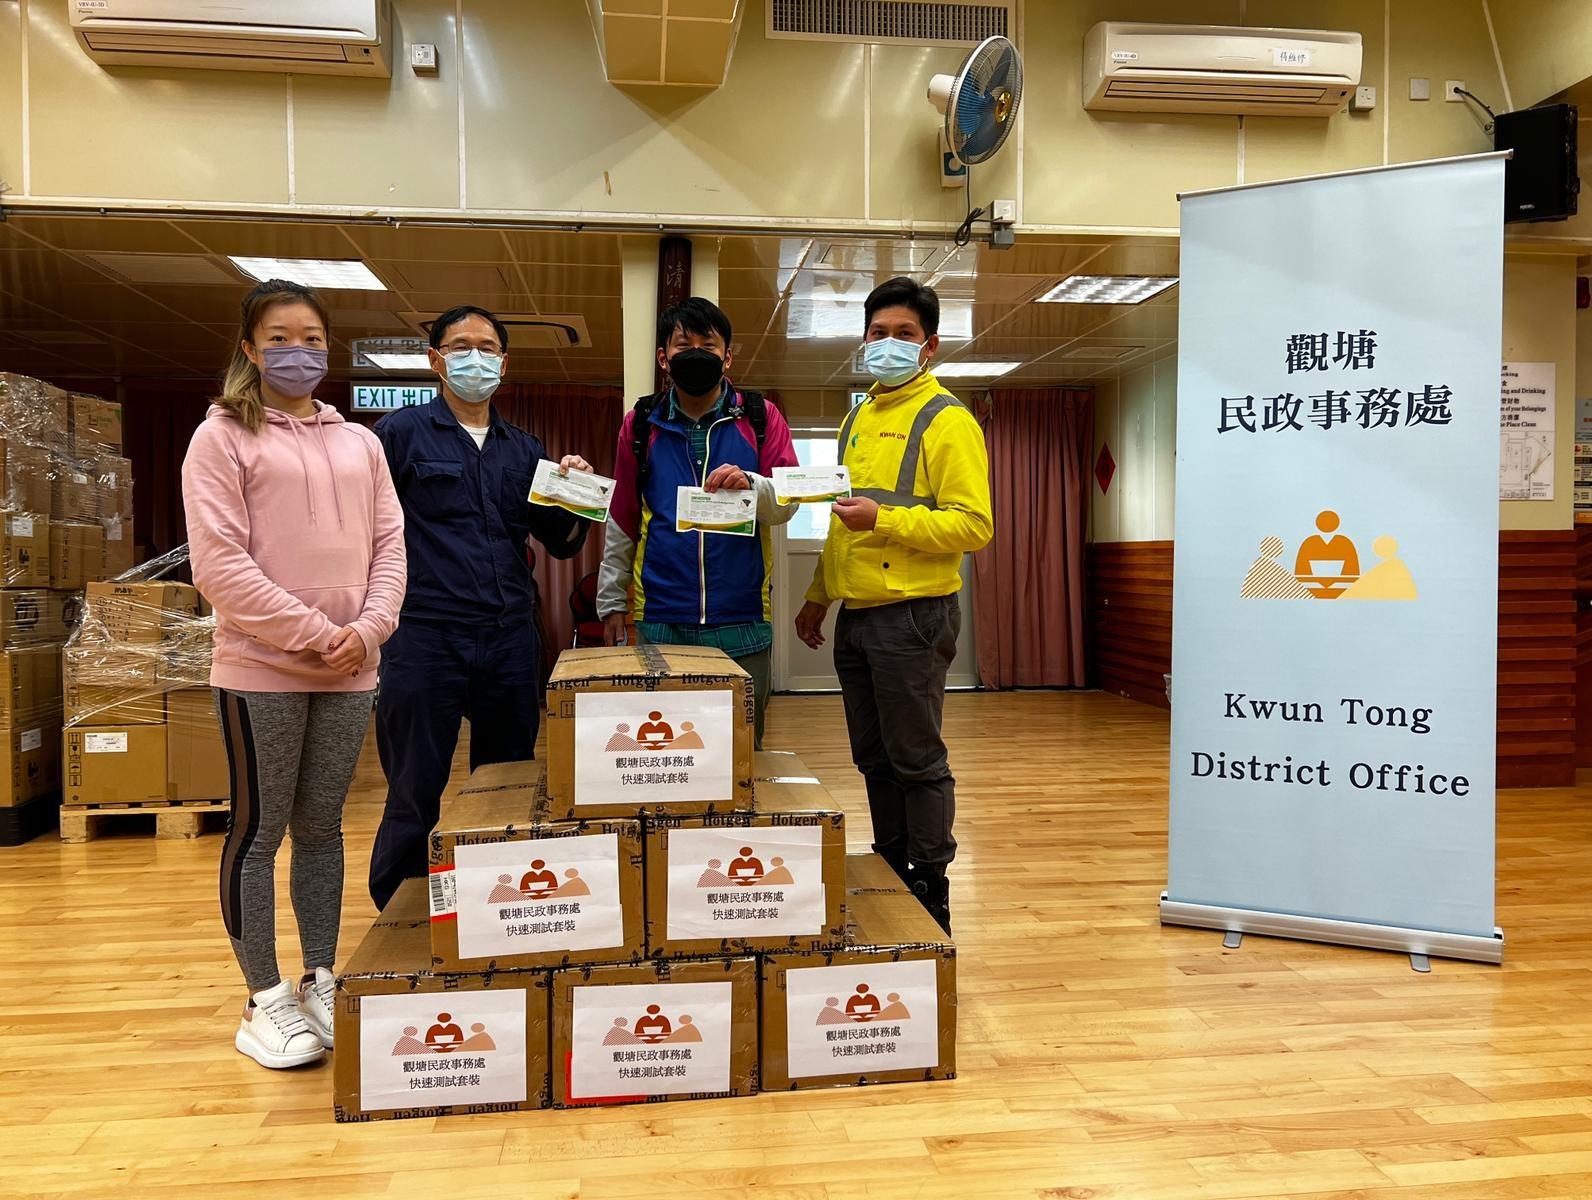 The Kwun Tong District Office today (February 25) distributed rapid test kits to households, cleansing workers and property management staff living and working in Chi Tai House of On Tai Estate for voluntary testing through the property management company.